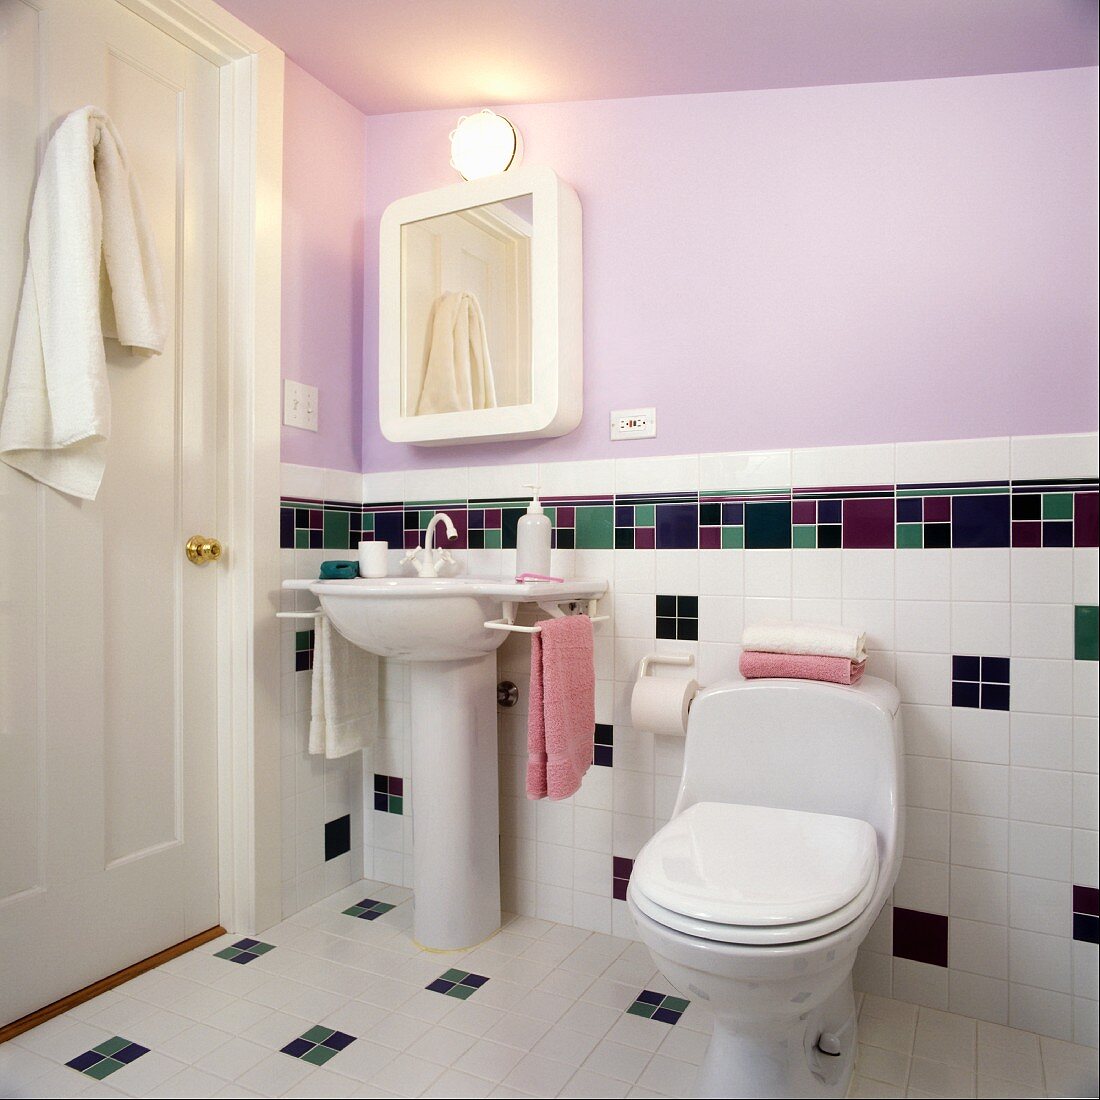 Sink and toilet in bathroom with lavender wall